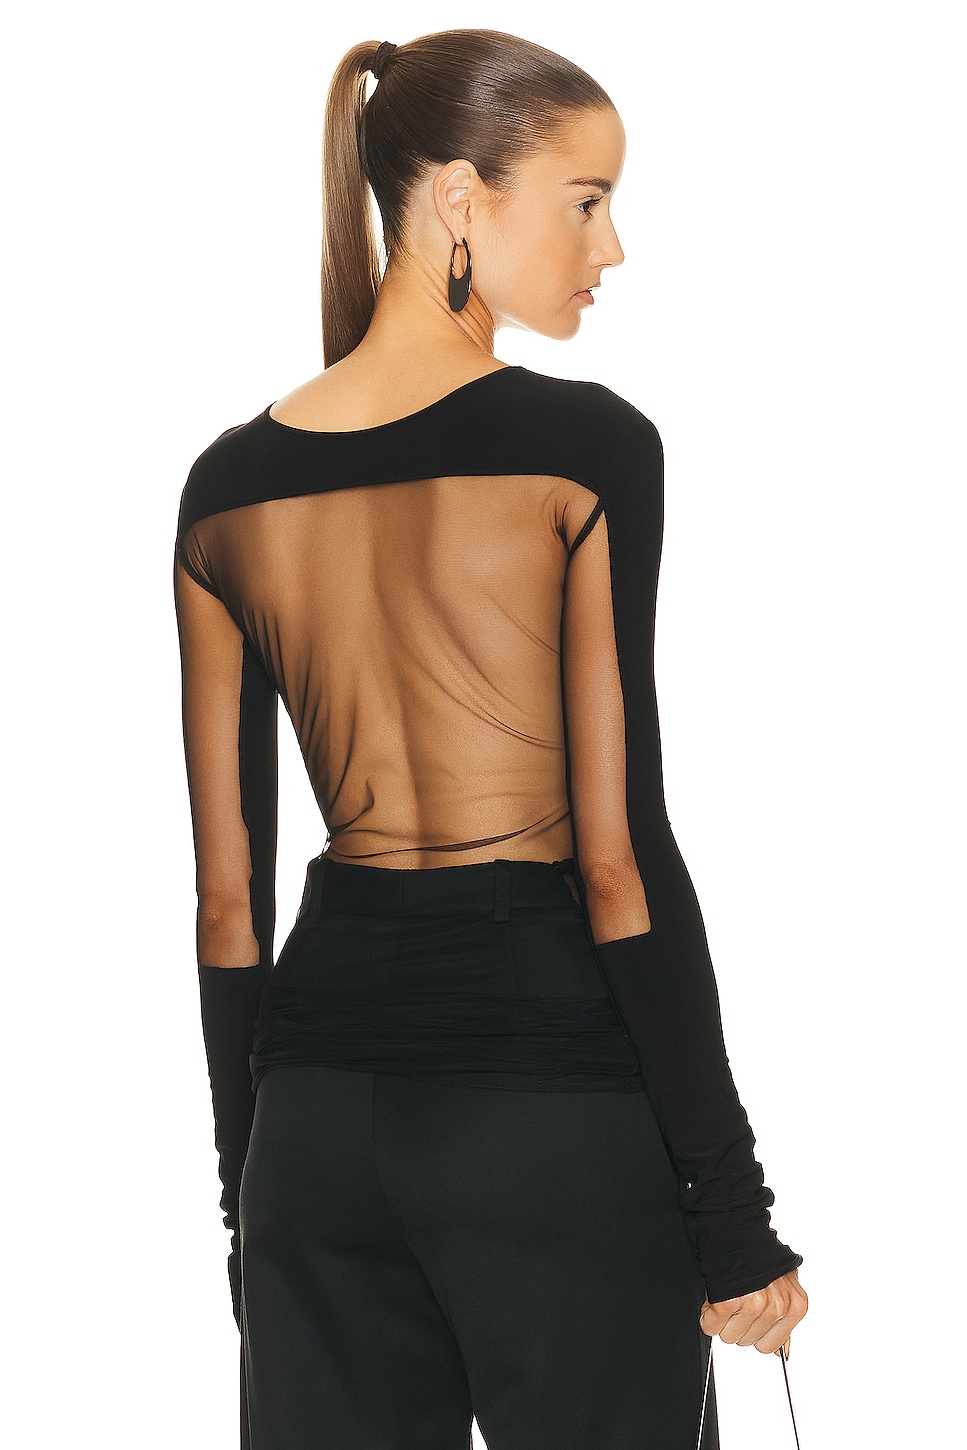 Square Sheer Cut Out Top in Black